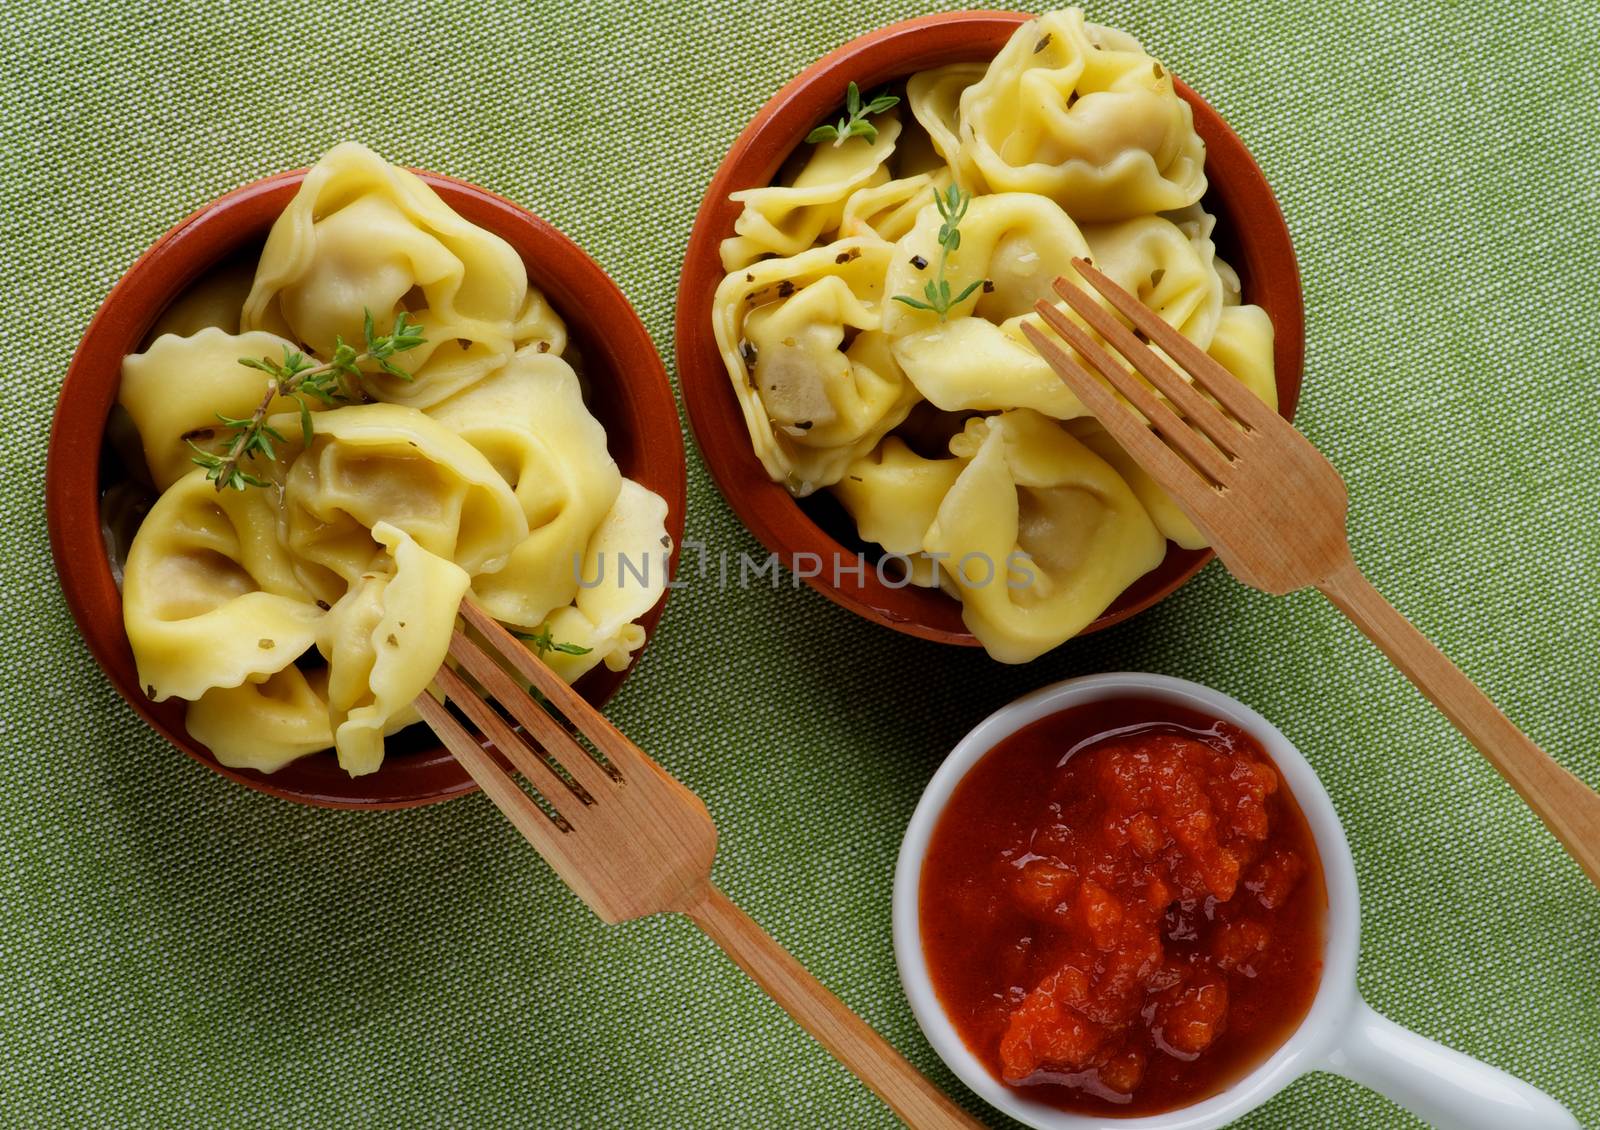 Delicious Meat Cappelletti in with Tomatoes Sauce and Wooden Forks closeup on Green Napkin background. Top View